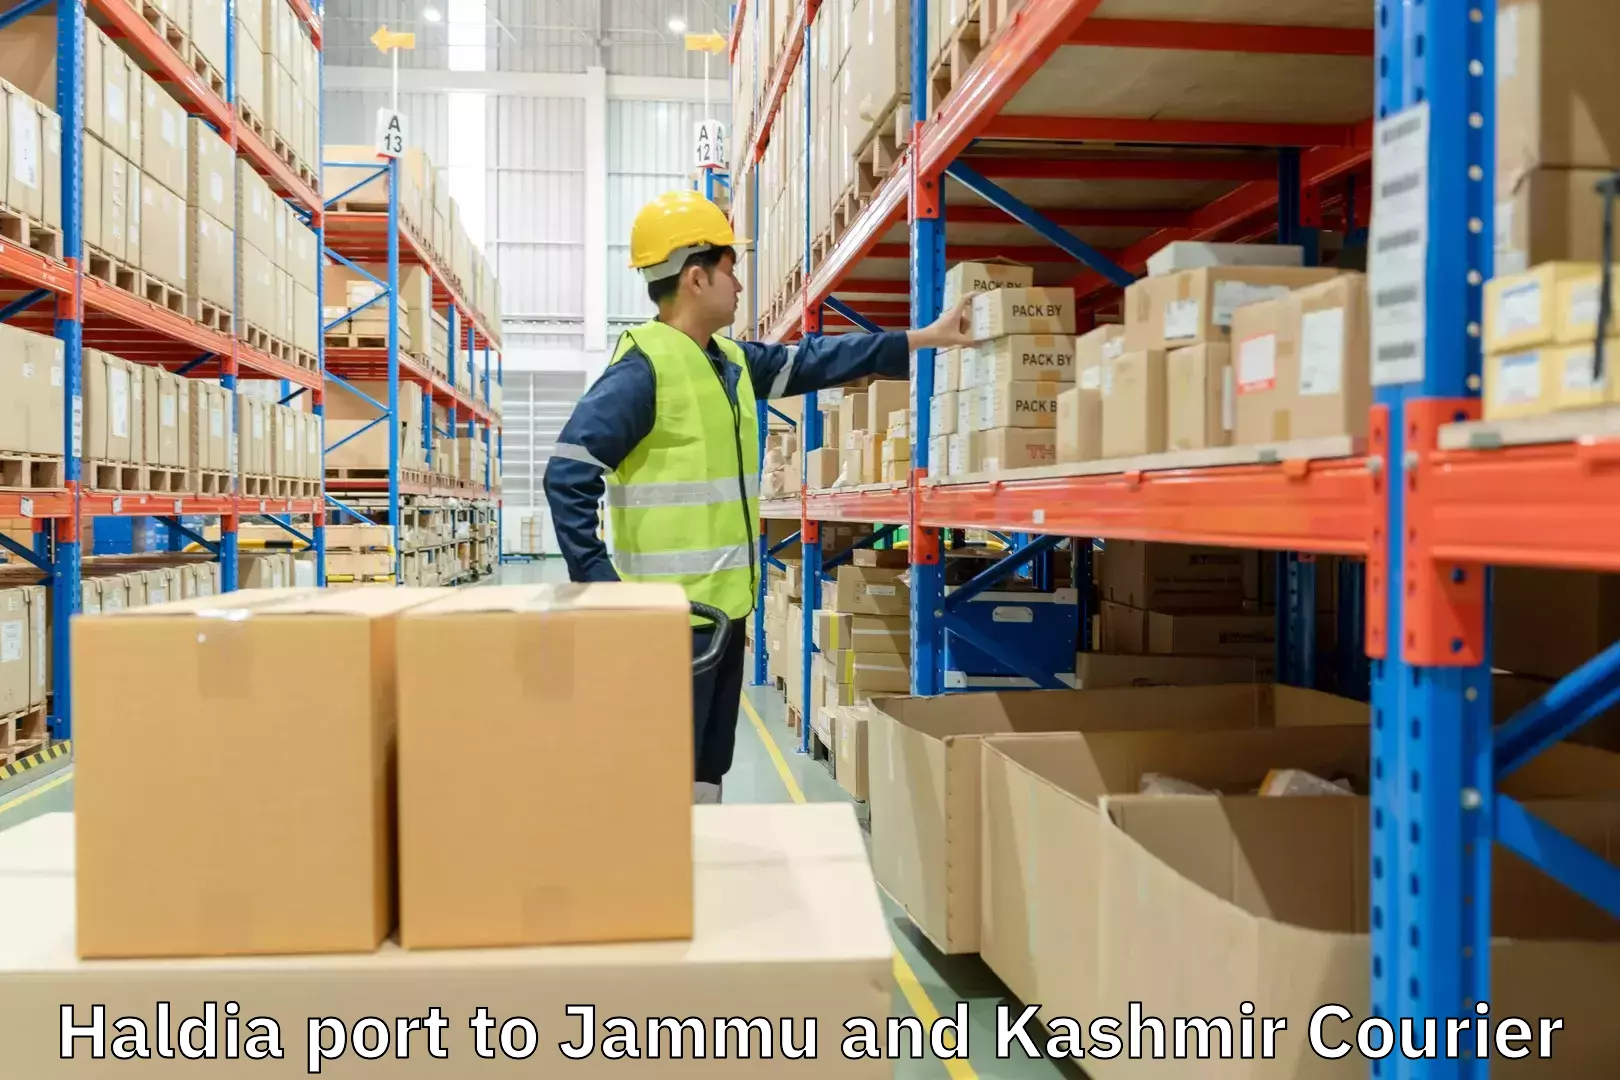 Small business couriers Haldia port to Jammu and Kashmir